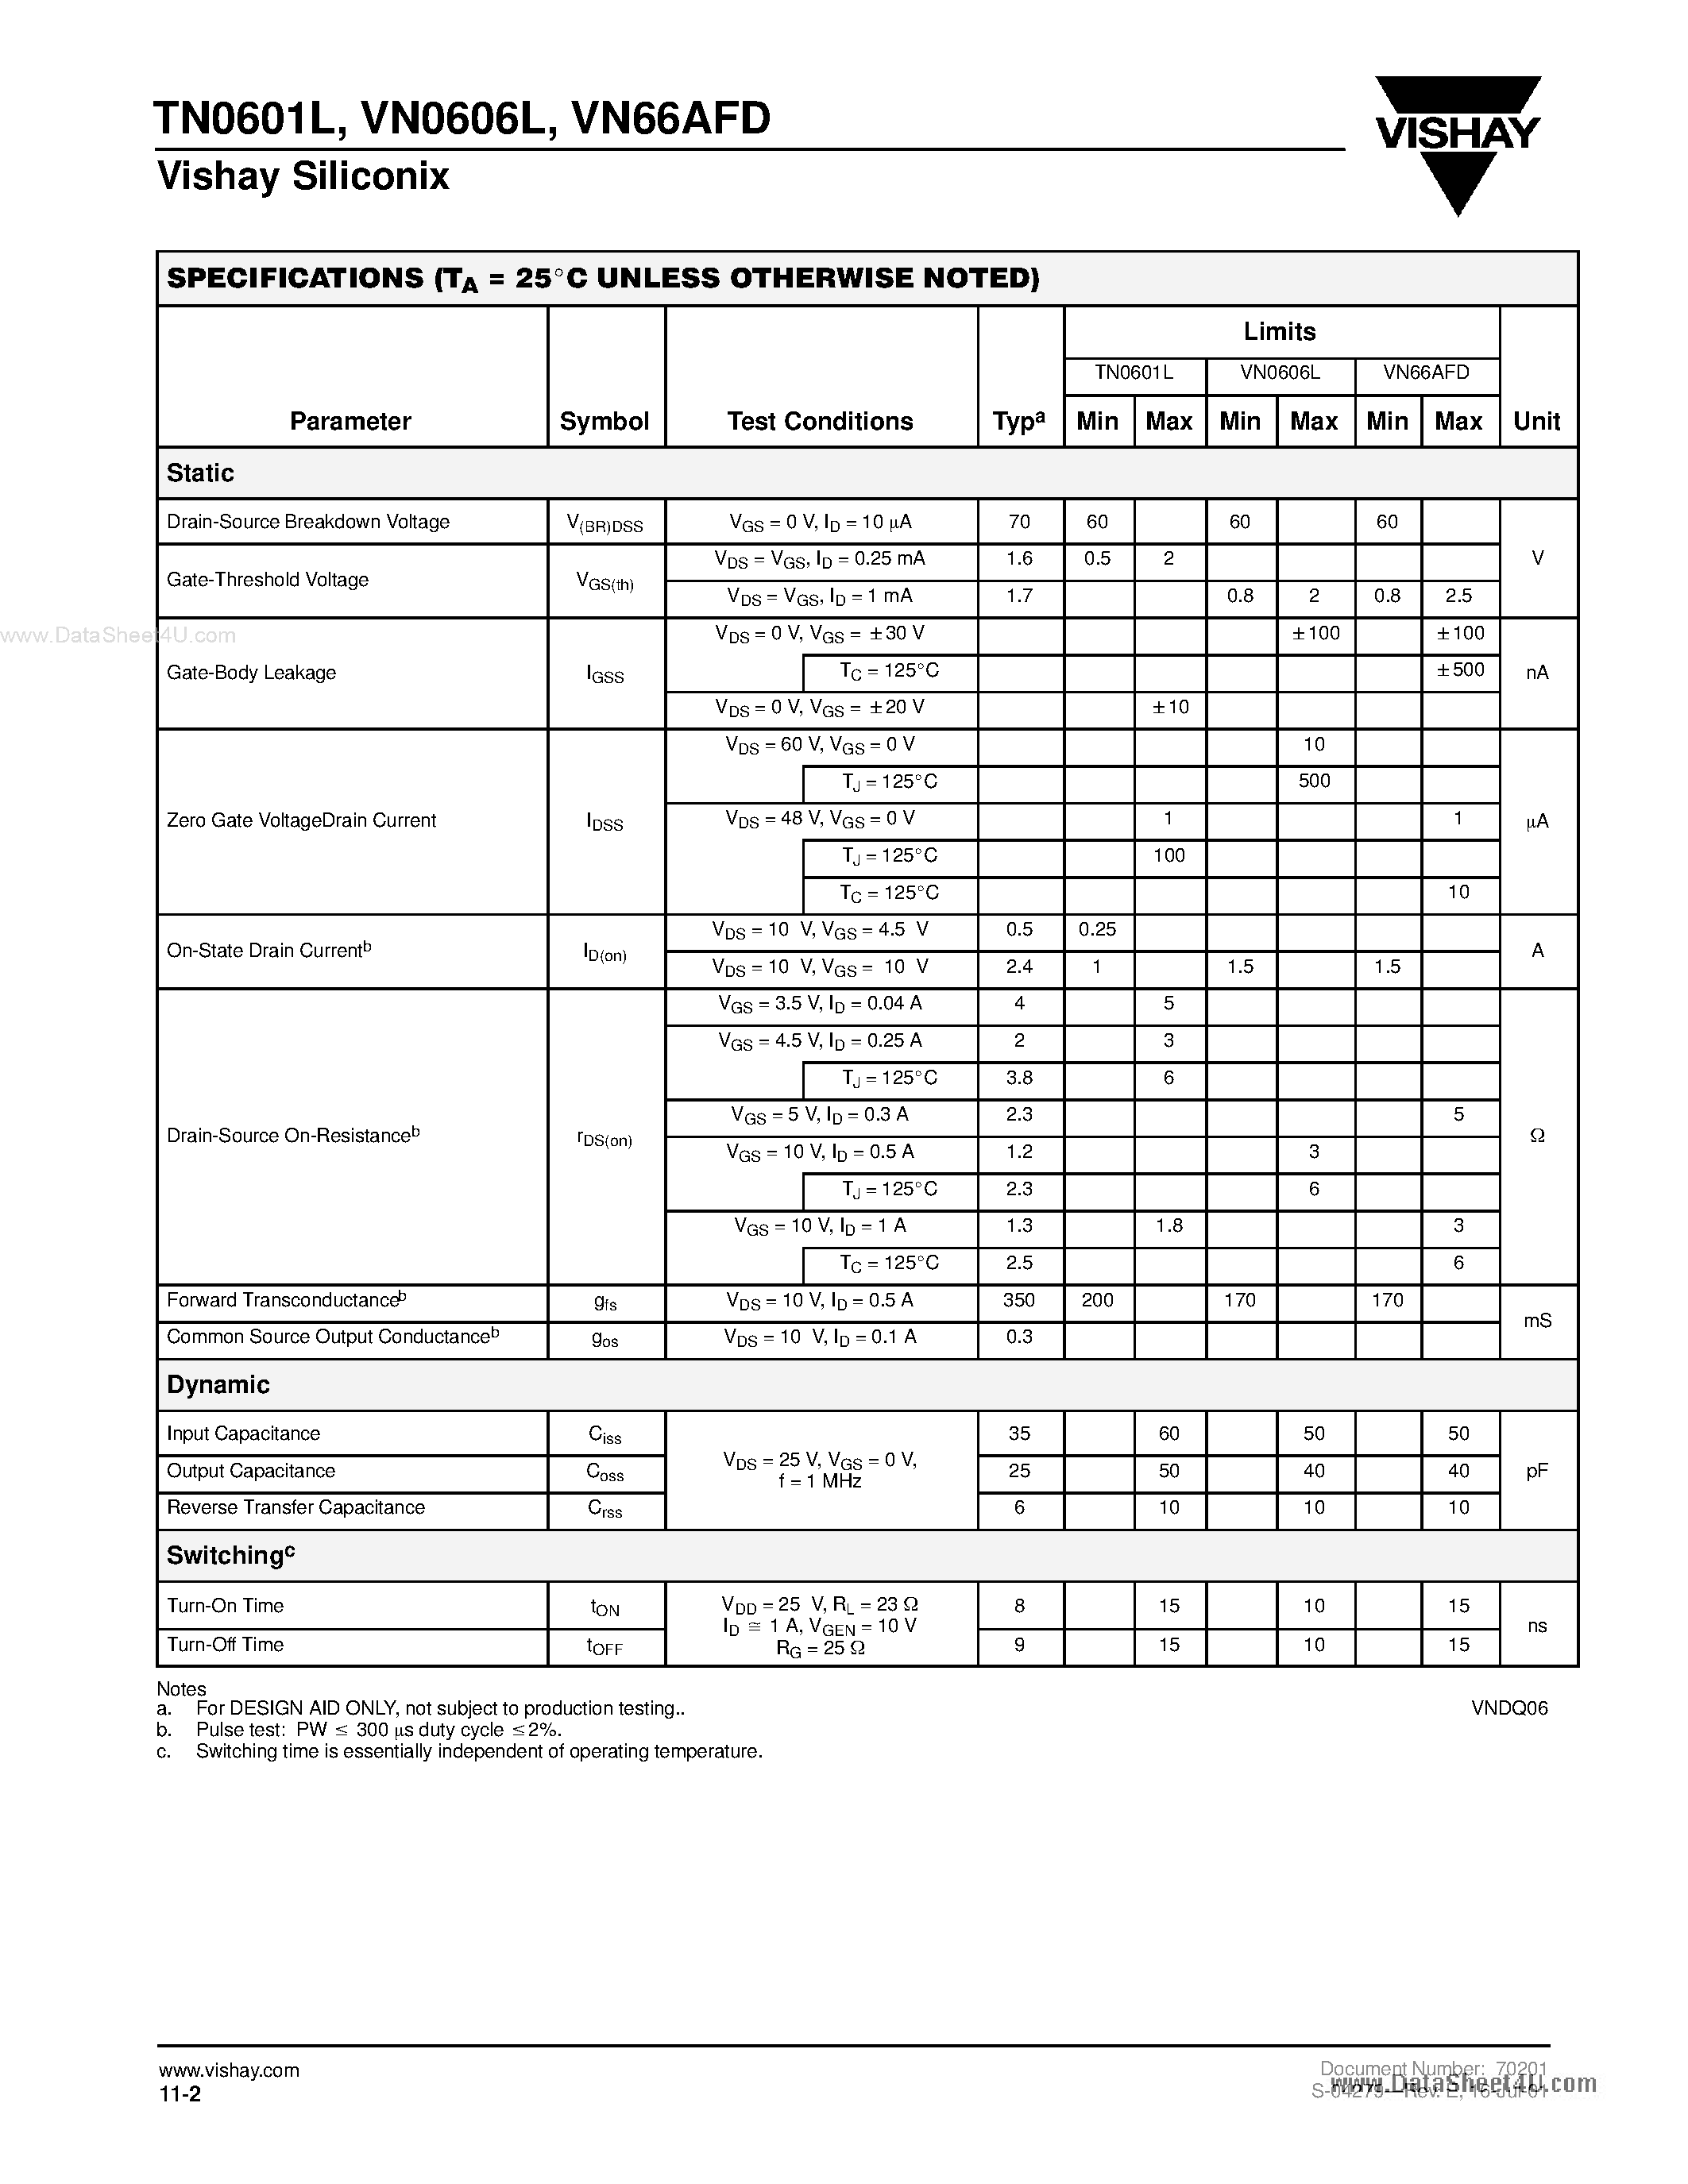 Datasheet VN0606L - N-Channel 60-V (D-S) MOSFETs page 2